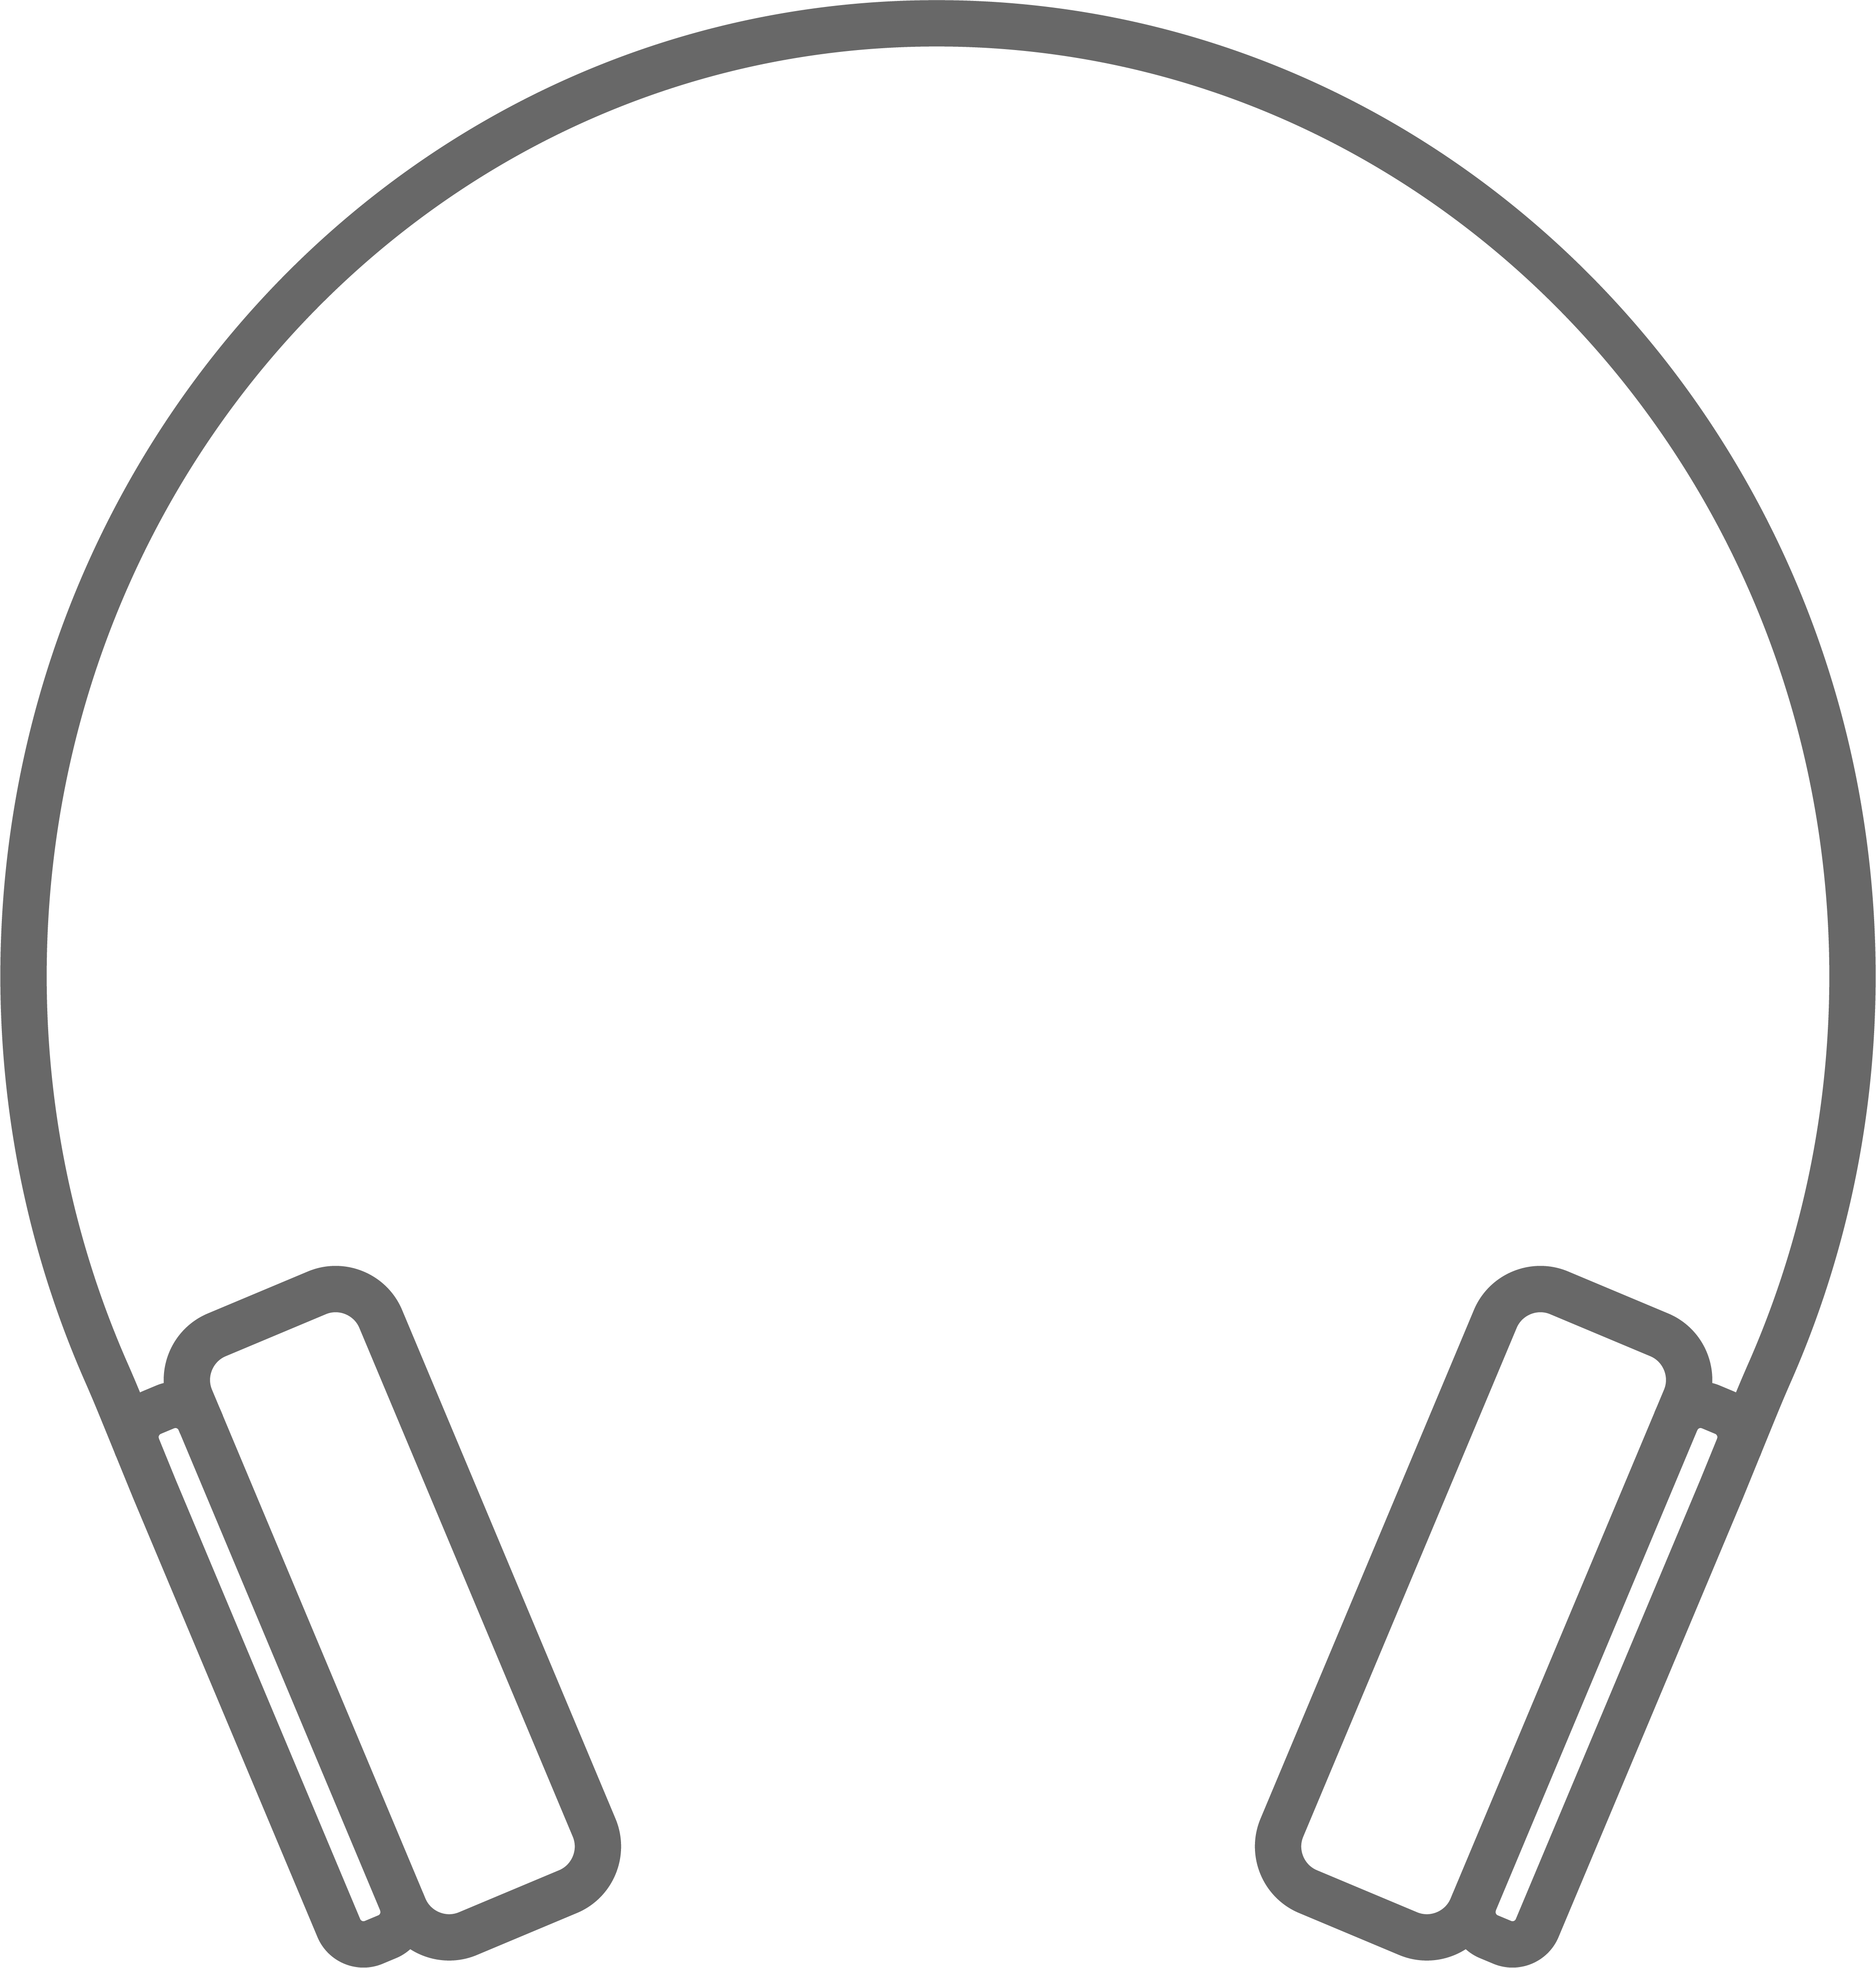 UPDATED_Web_Icons_2020_expanded_headphones